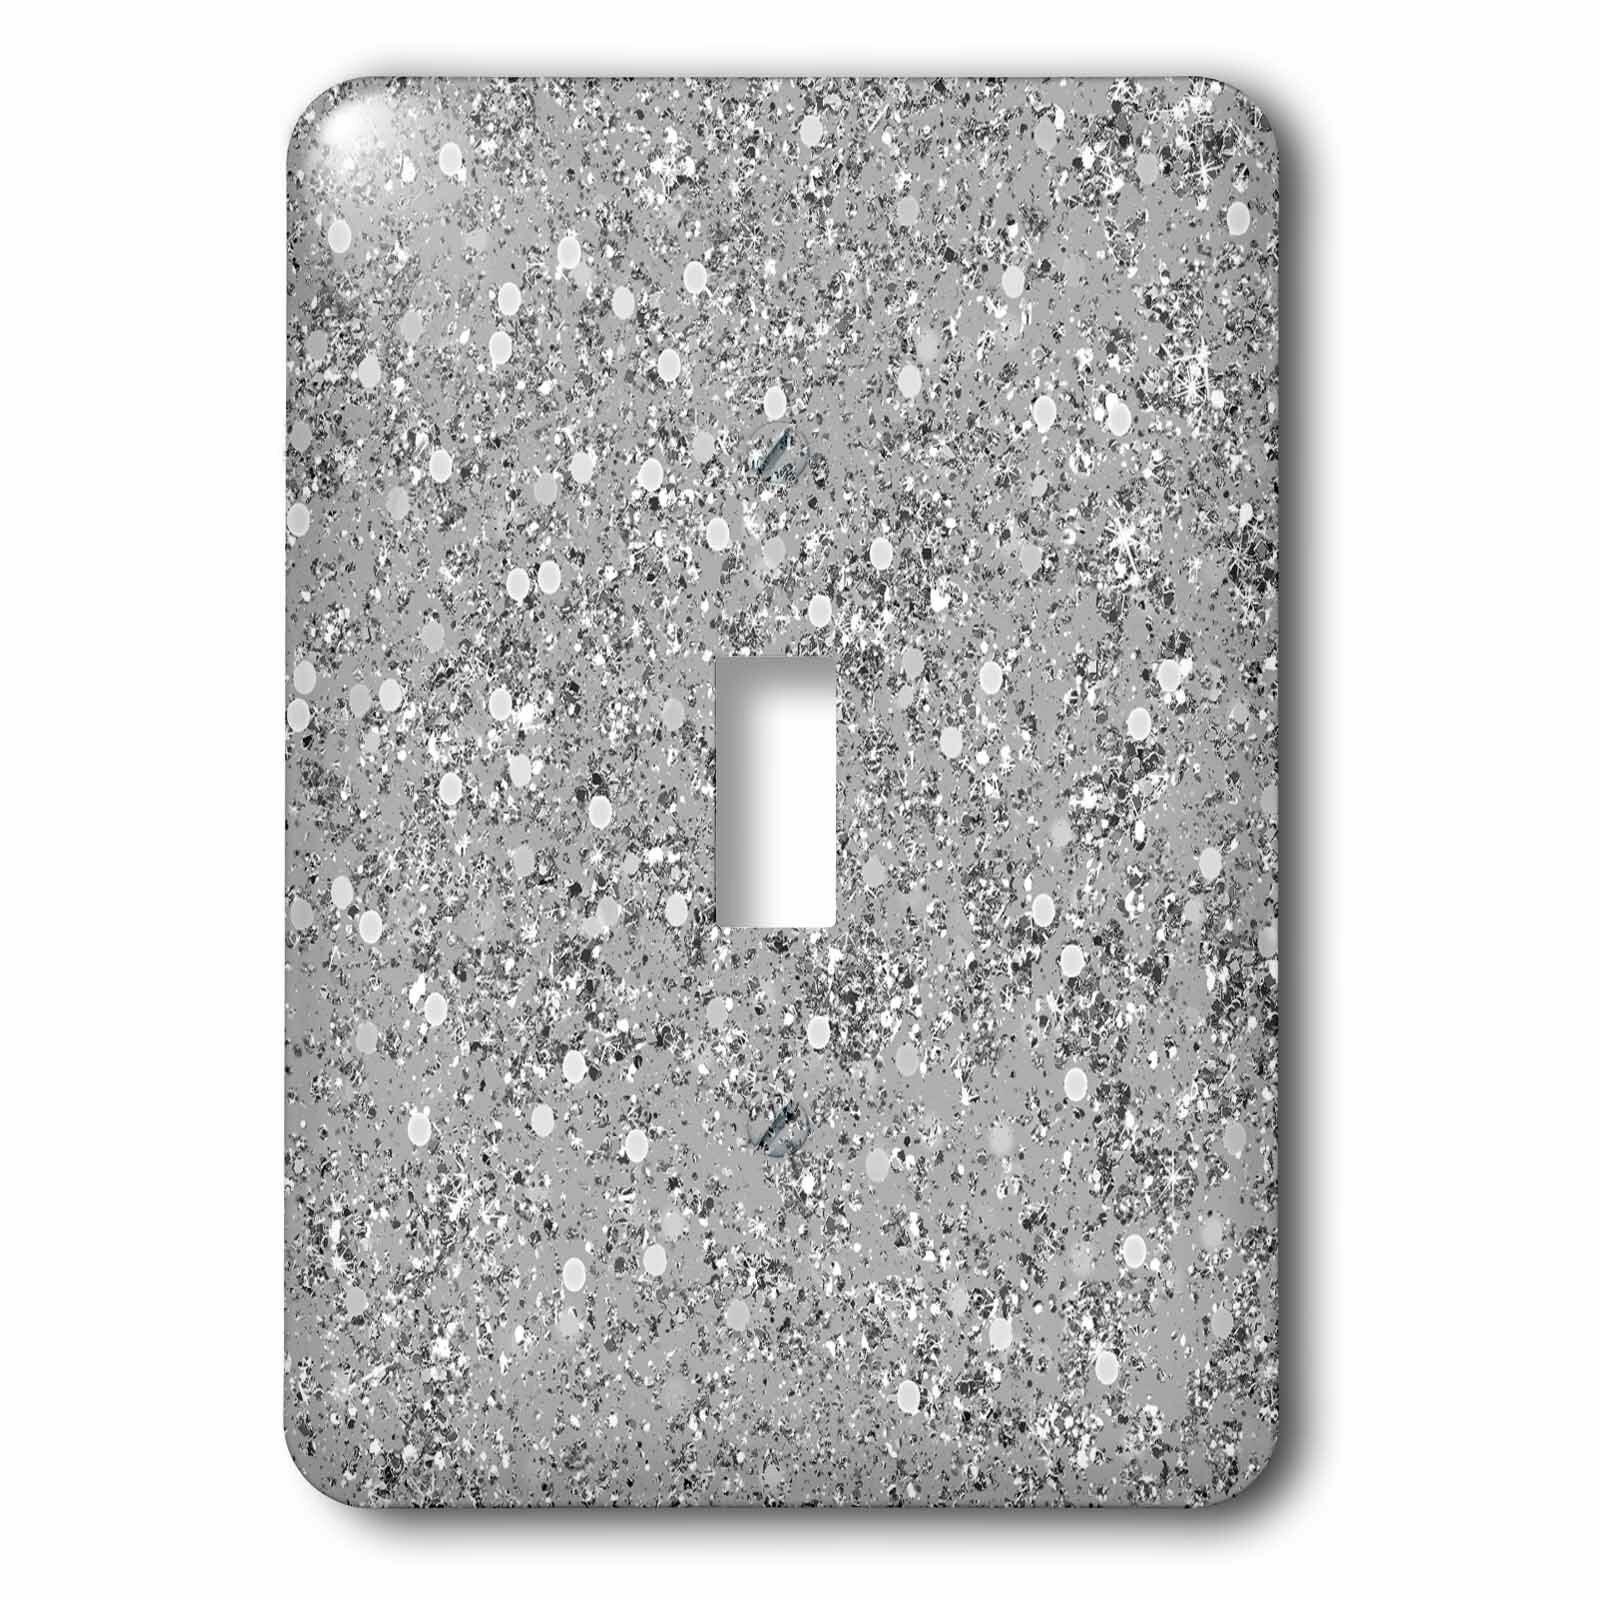 Includes screws USA standard Silver Glittered 4 toggle Electrical Switch Plate 